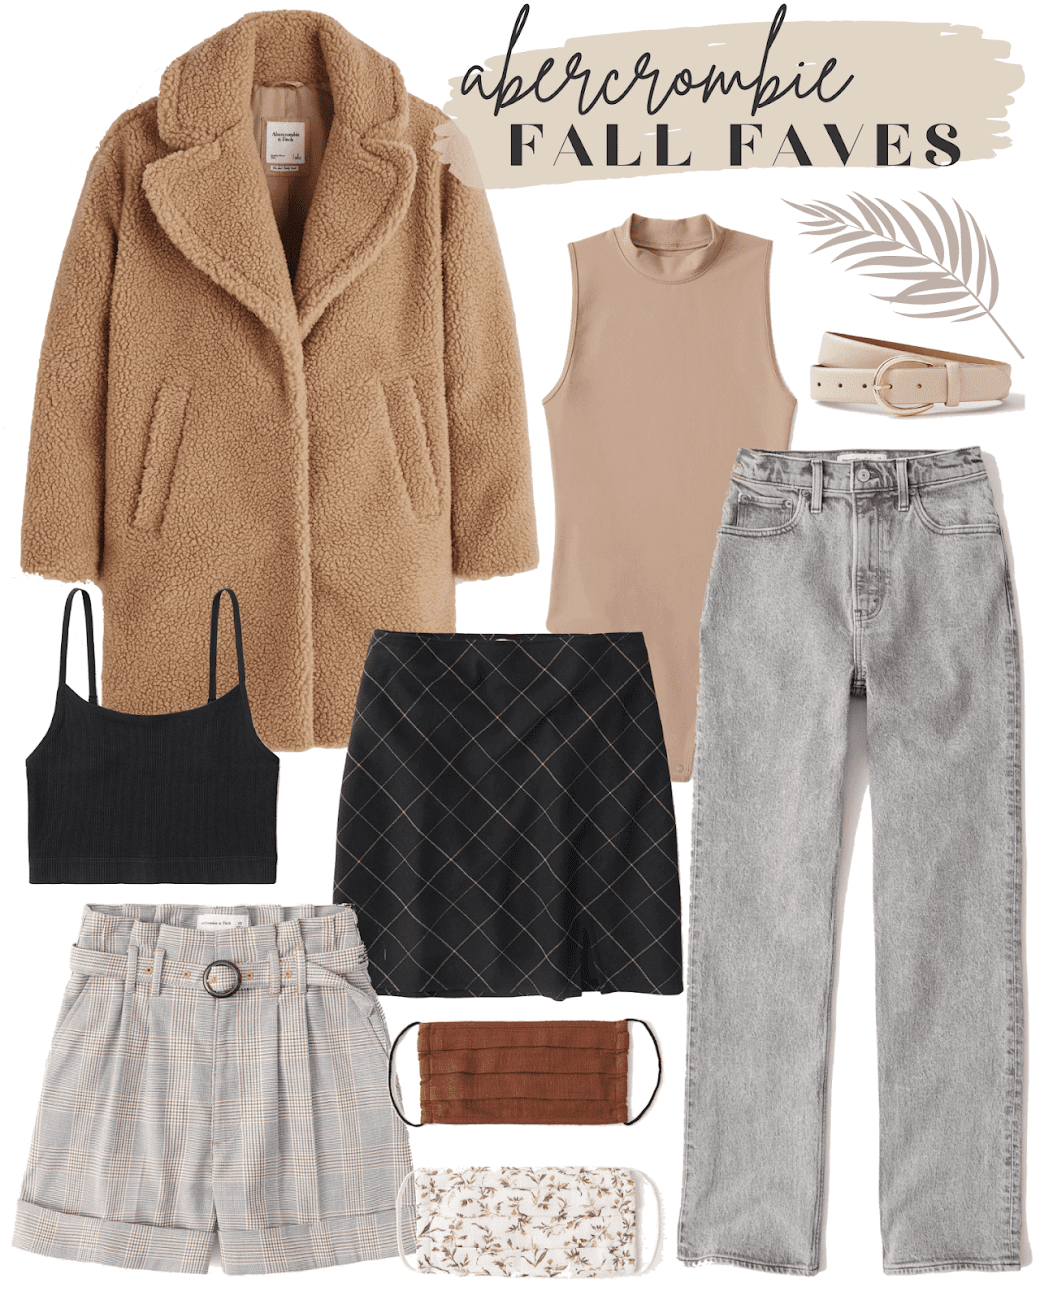 Abercrombie Fall Favorites / Lucky Day